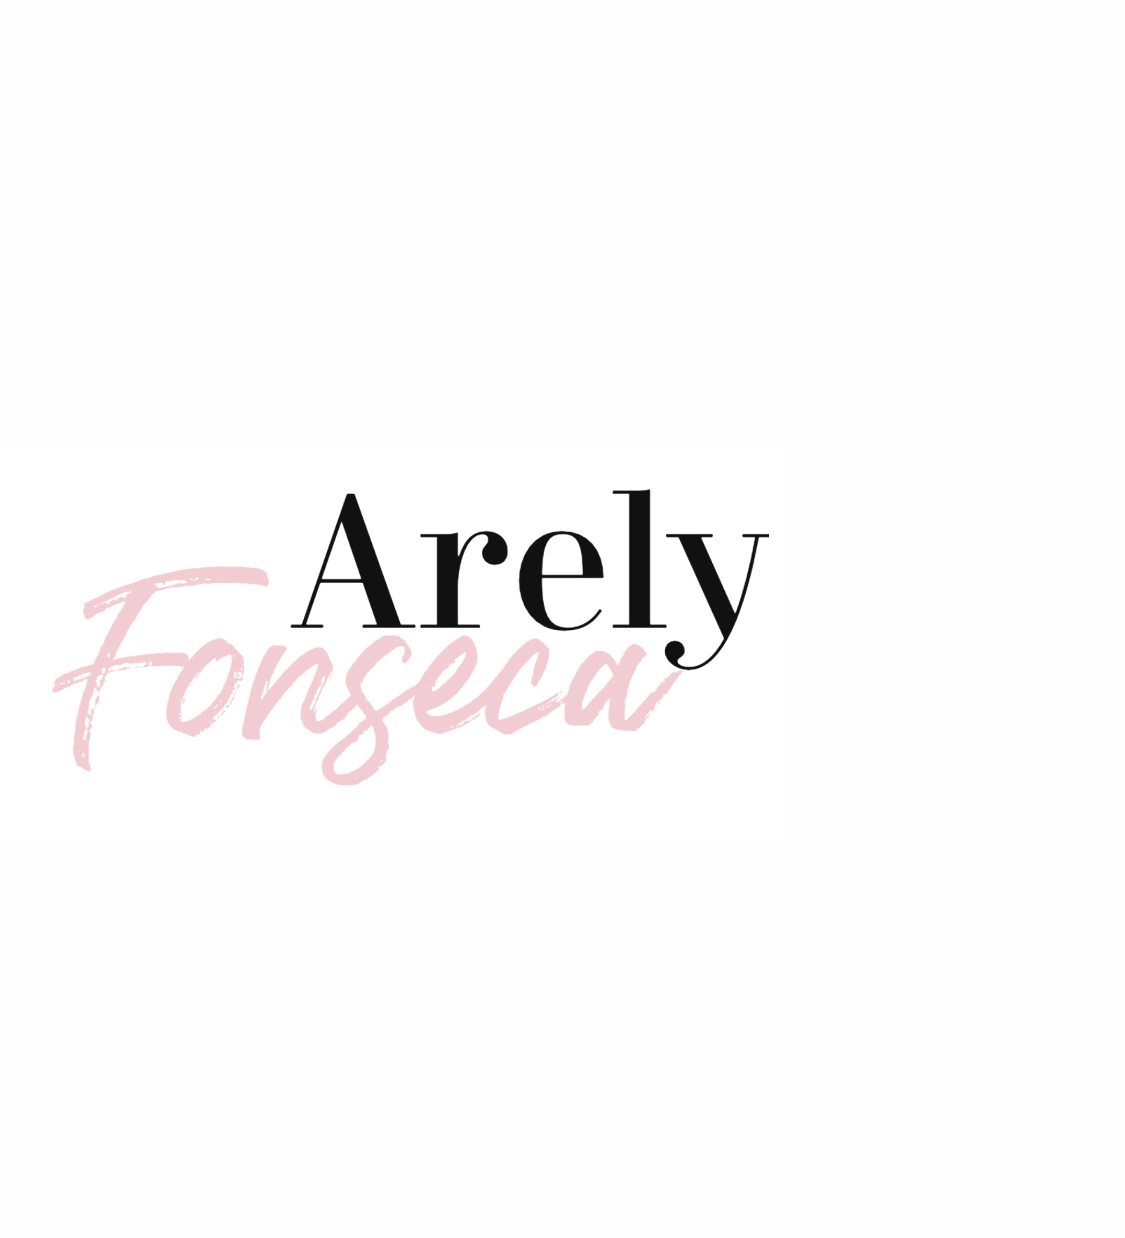 Arely Fonseca